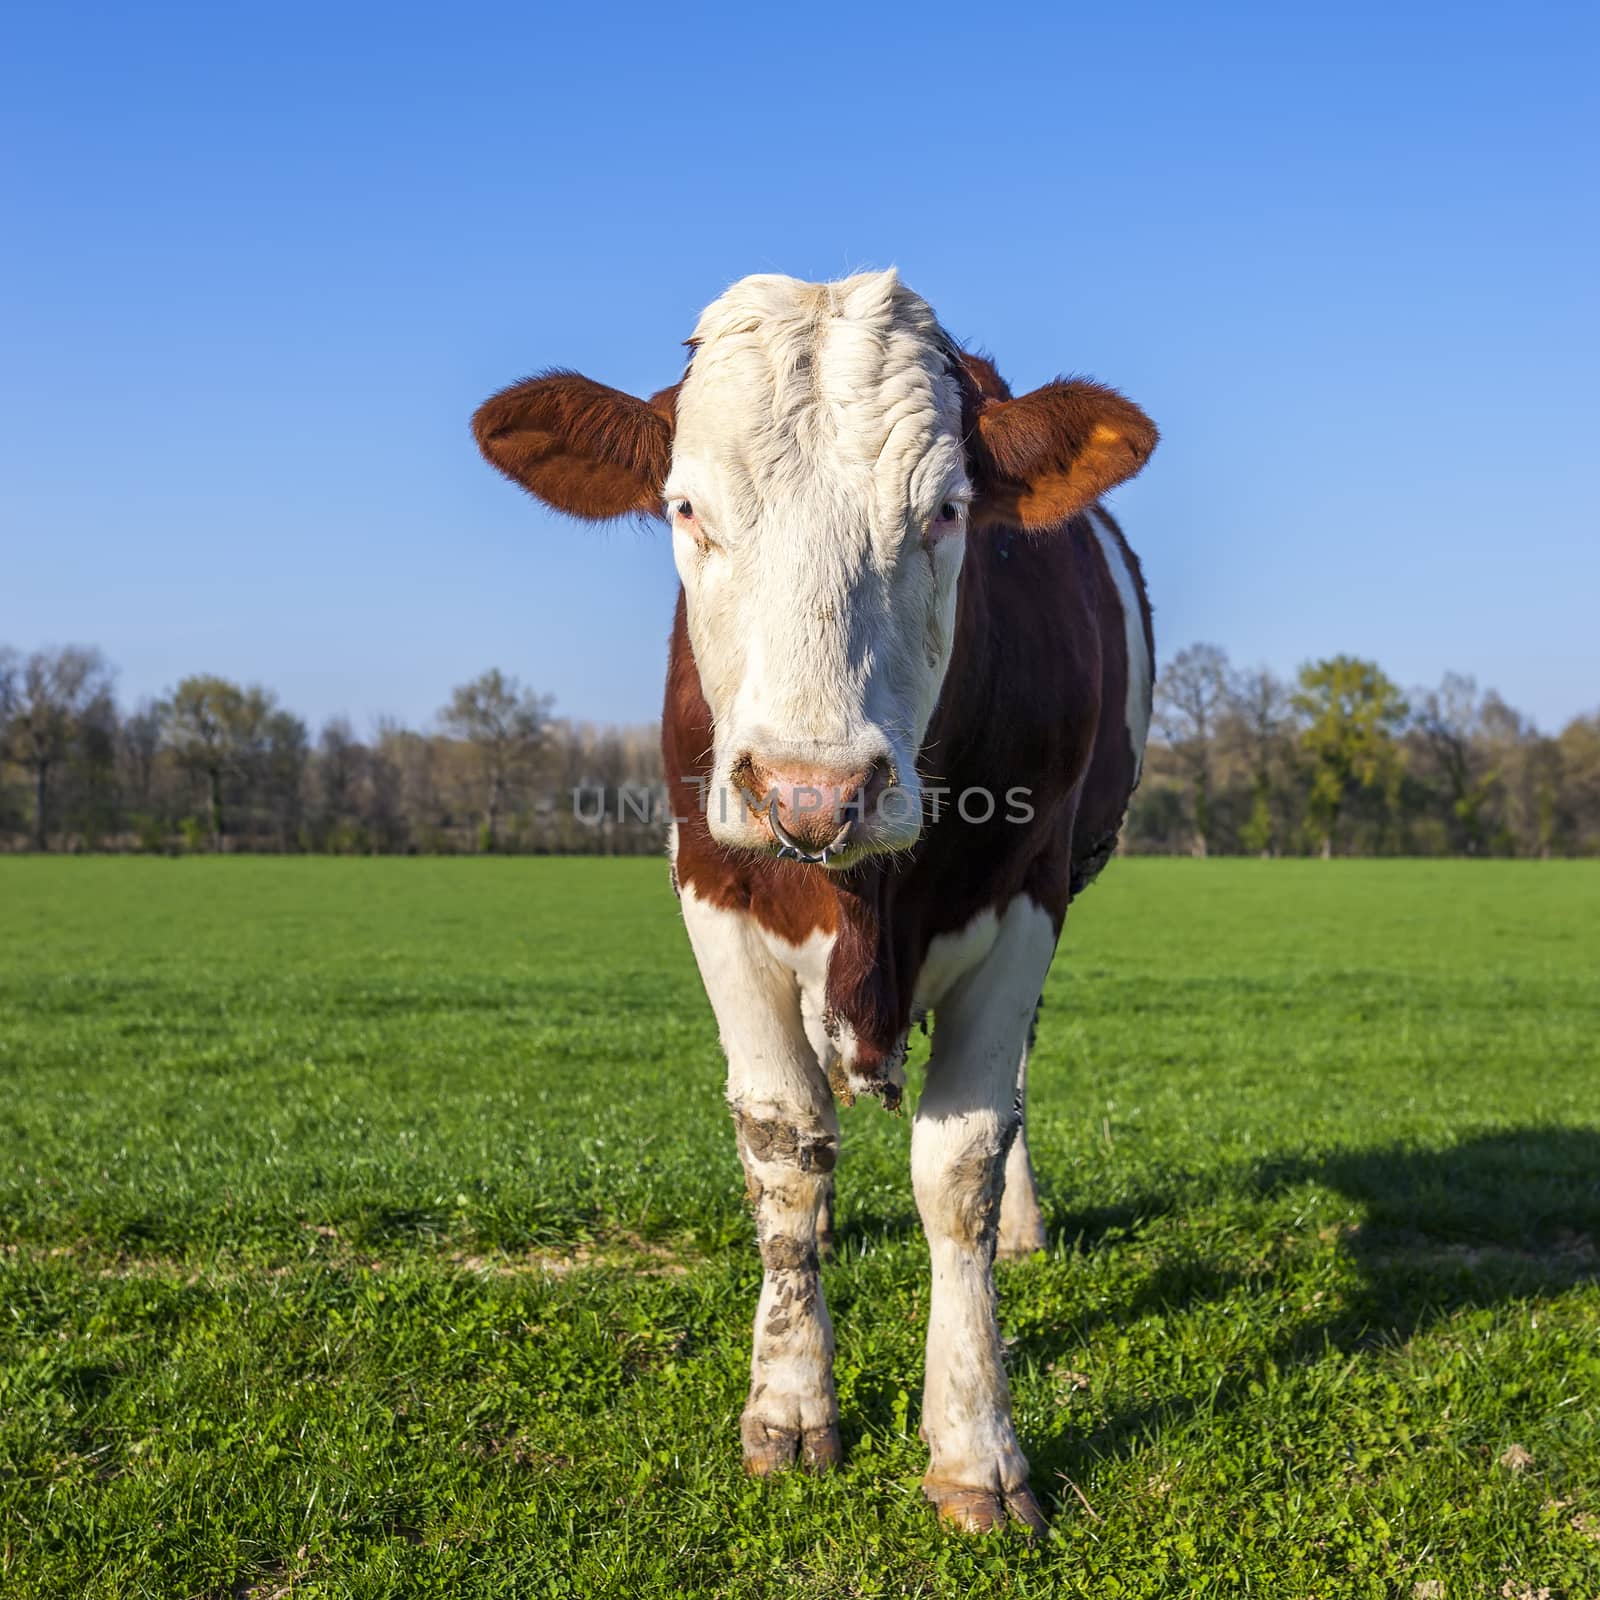 White and brown cow on green grass with blue sky